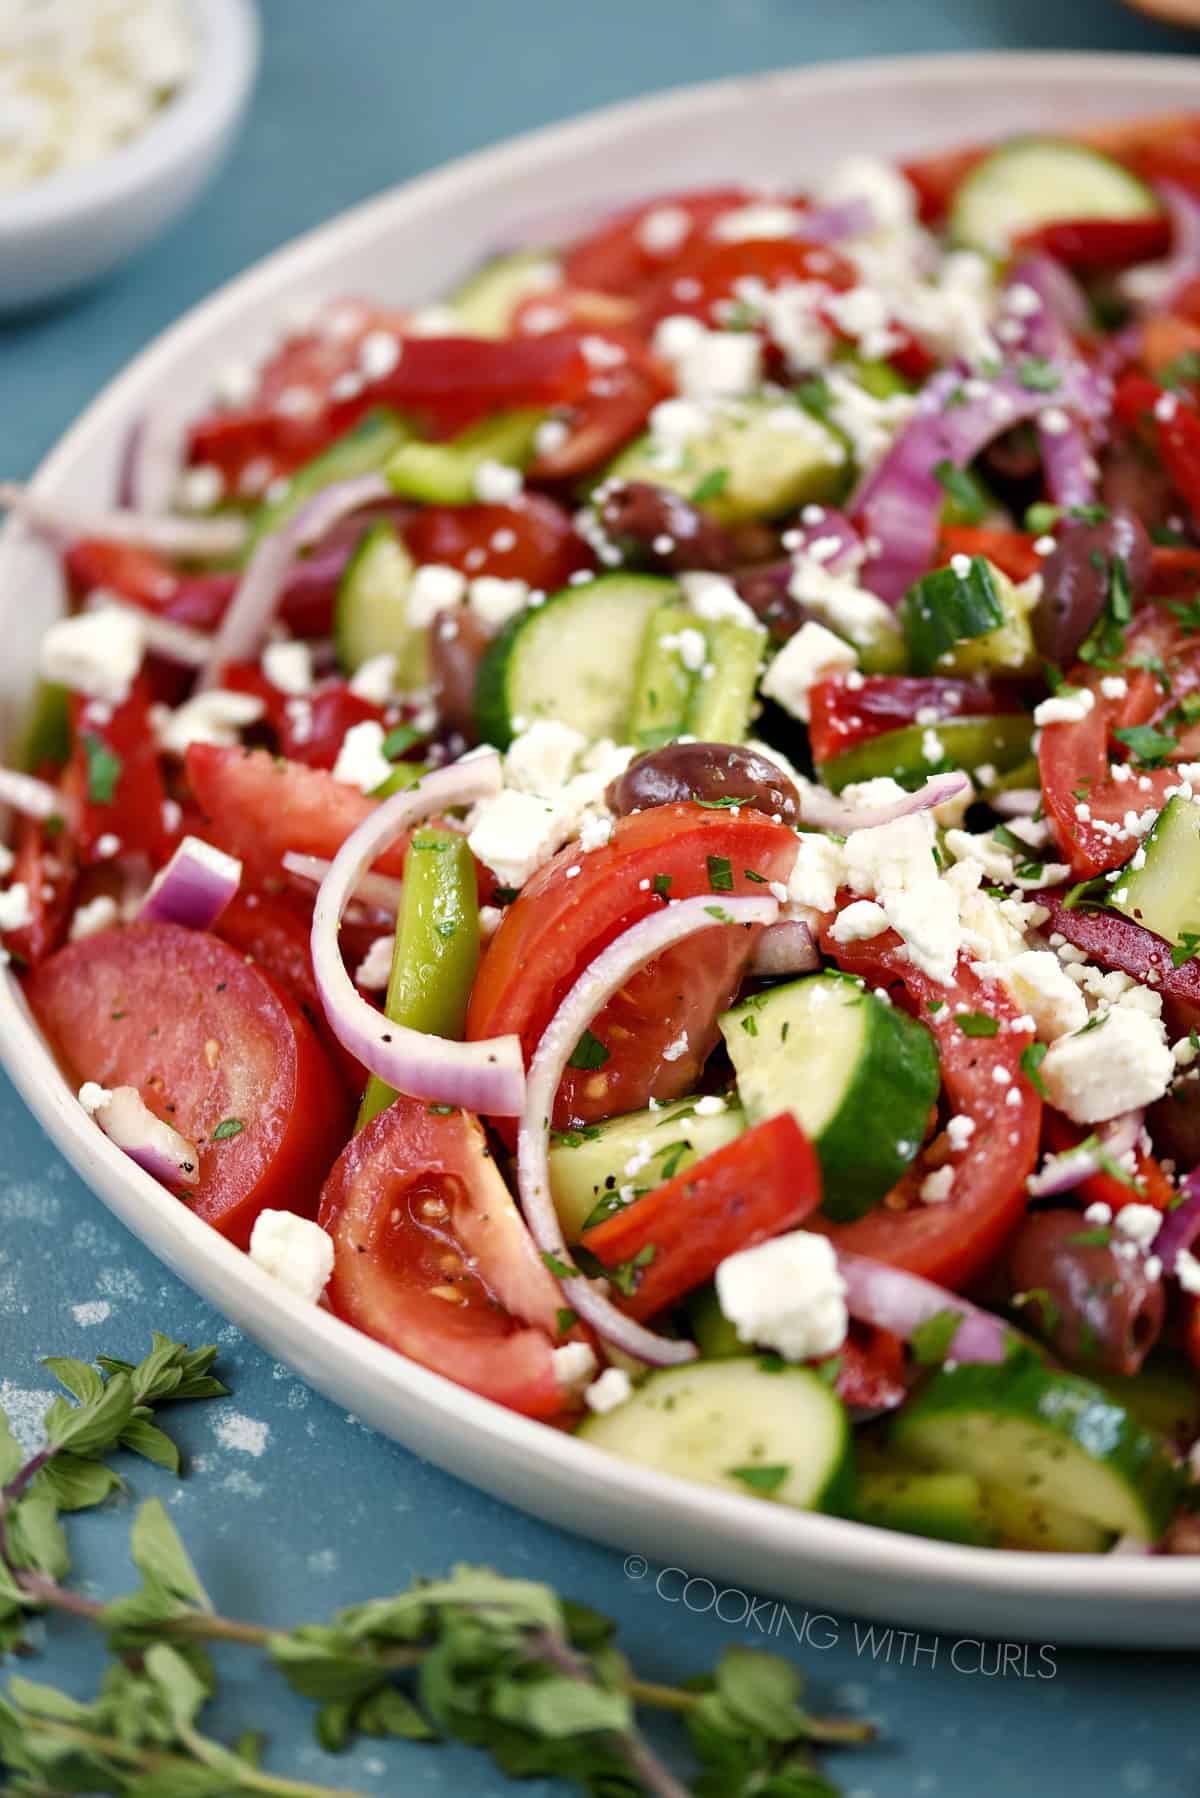 A close-up of tomato wedges, onion, cucumber and bell pepper slices topped with a light vinaigrette and feta cheese in a large white serving platter.